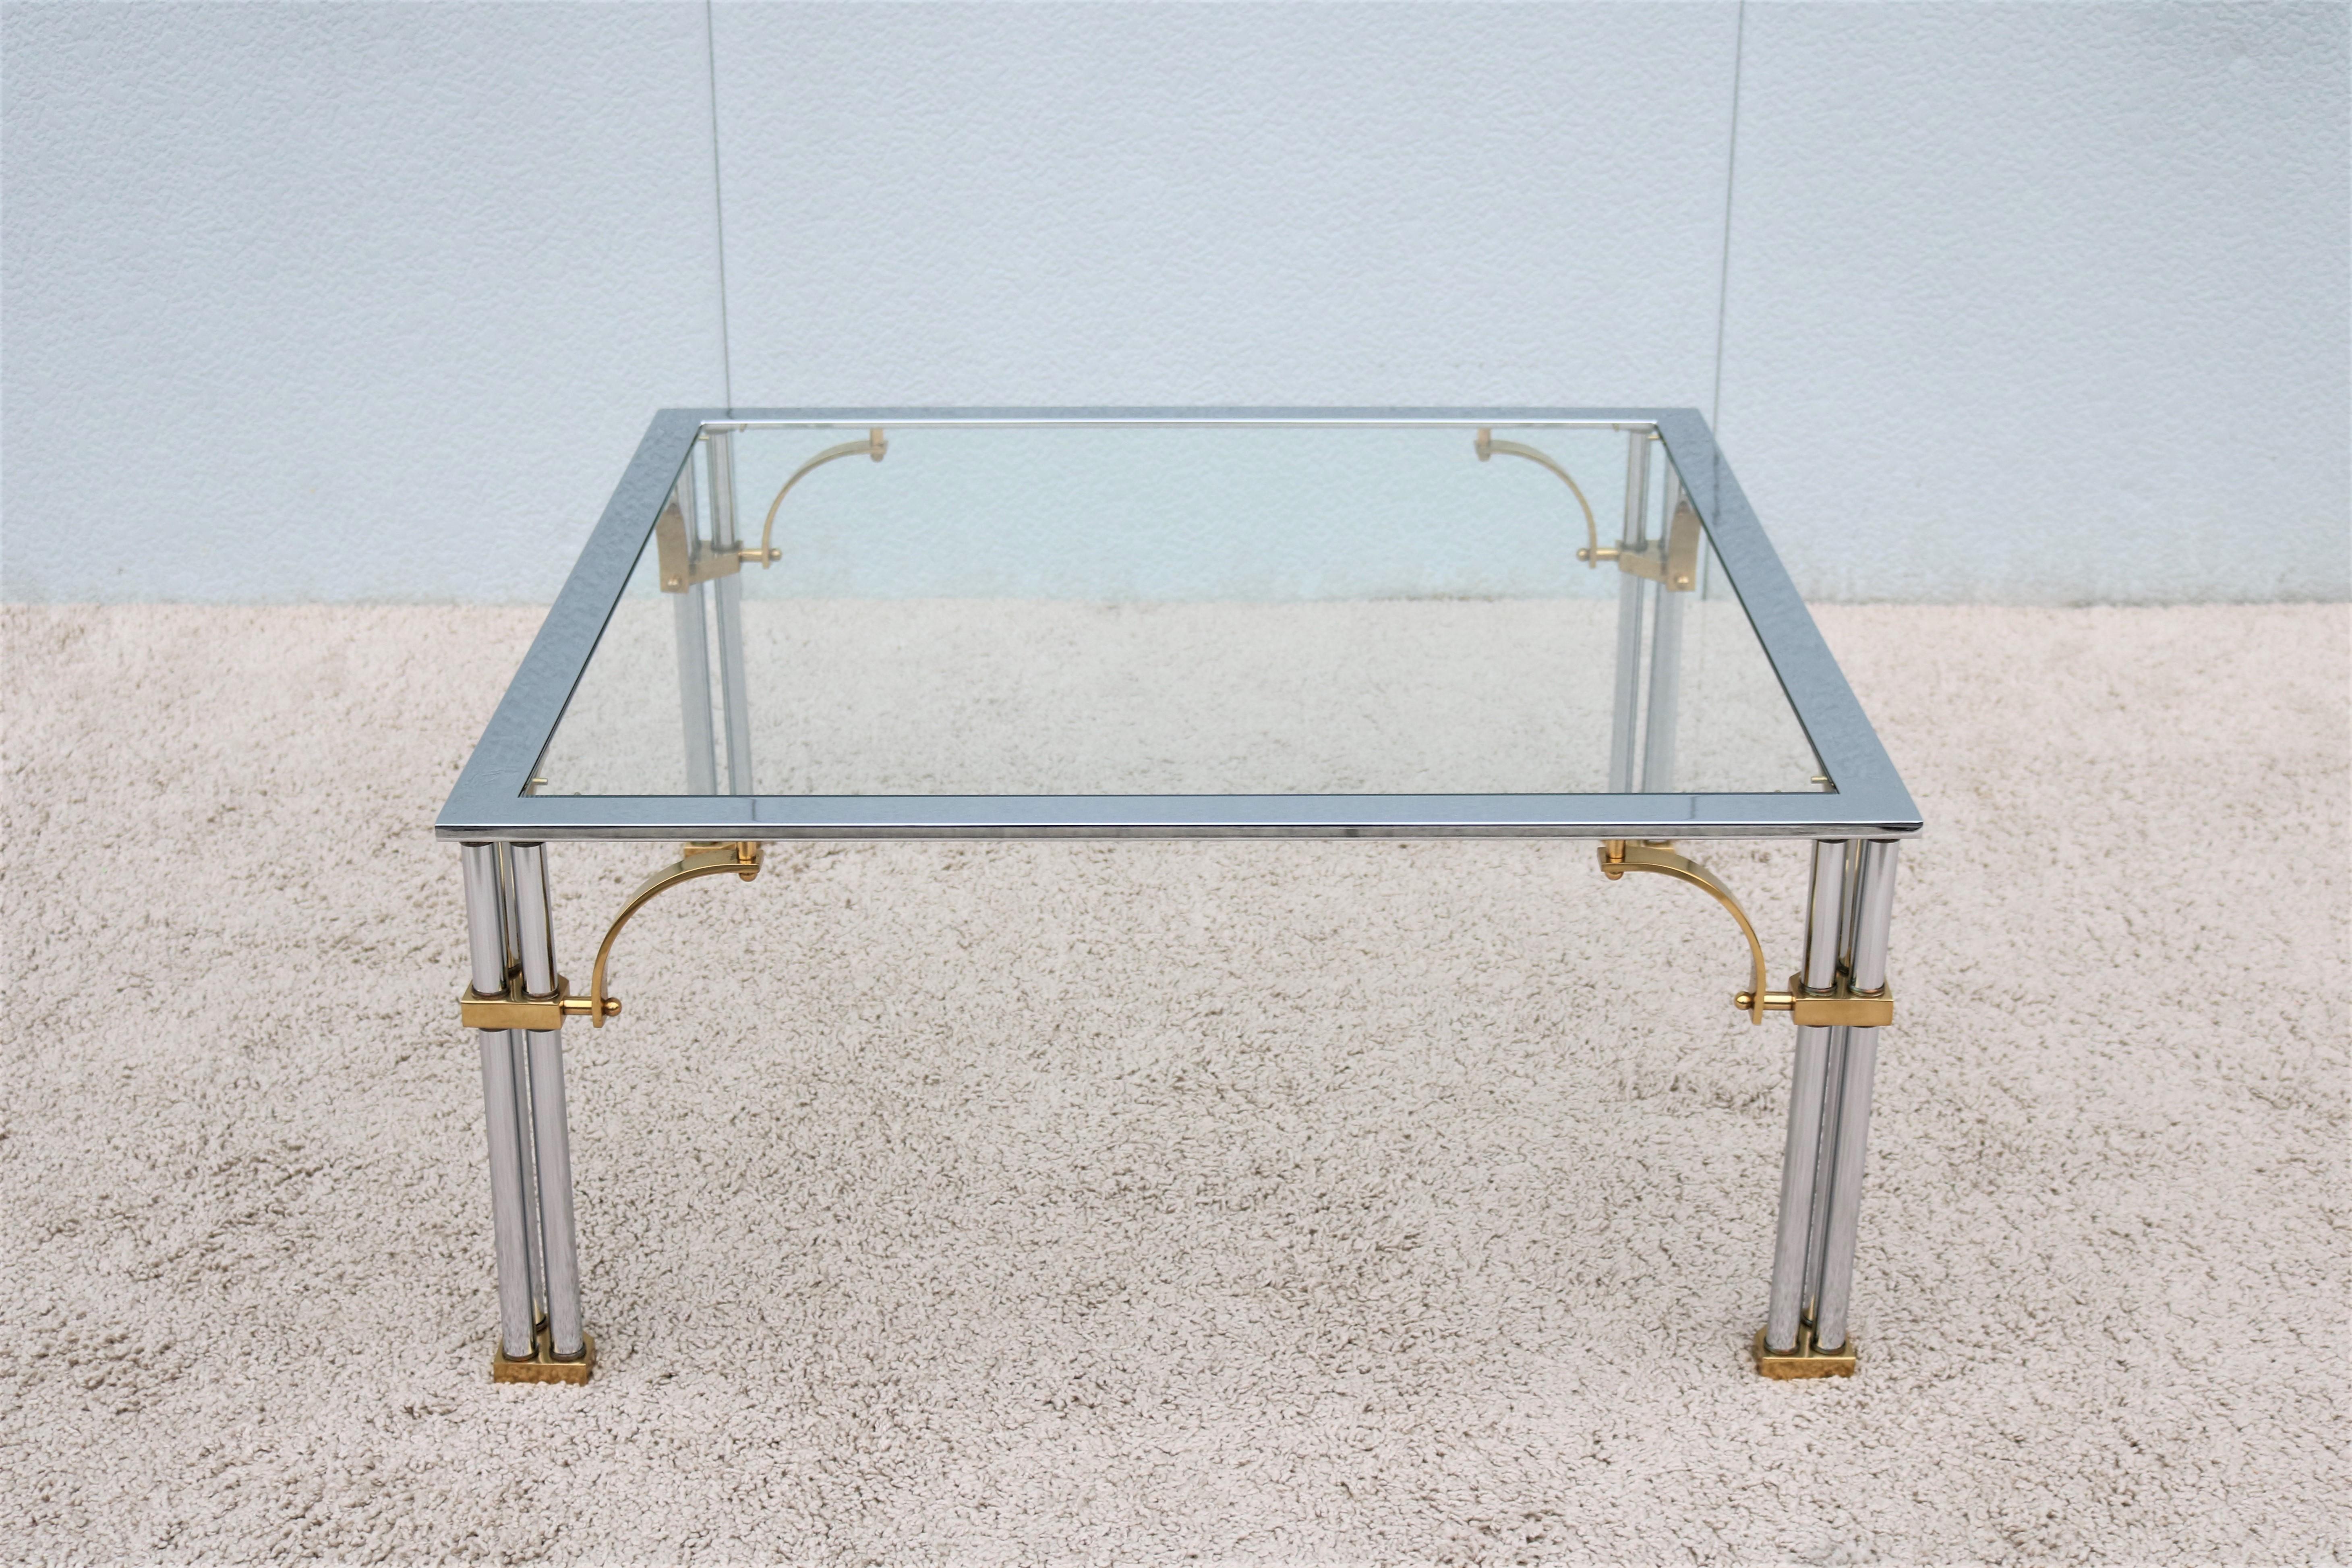 Stunning and elegant looking Hollywood Regency Maison Jansen style Brass Chrome and Glass square coffee table. 
Features tubular chrome legs with brass arched corner supports.
The polished chrome and beautiful brass details make this table